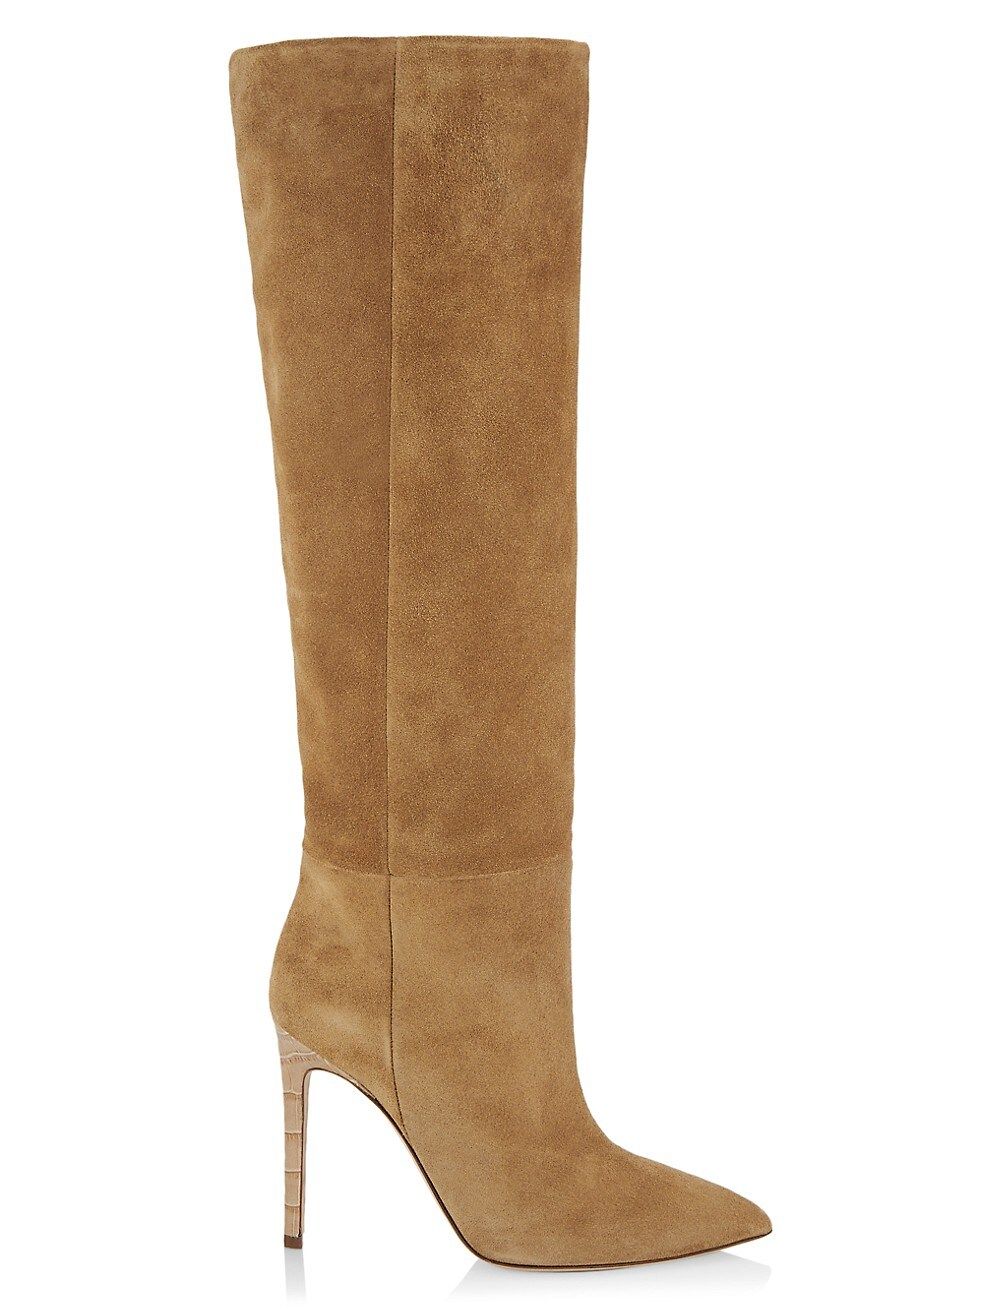 Suede Stiletto Boots | Saks Fifth Avenue